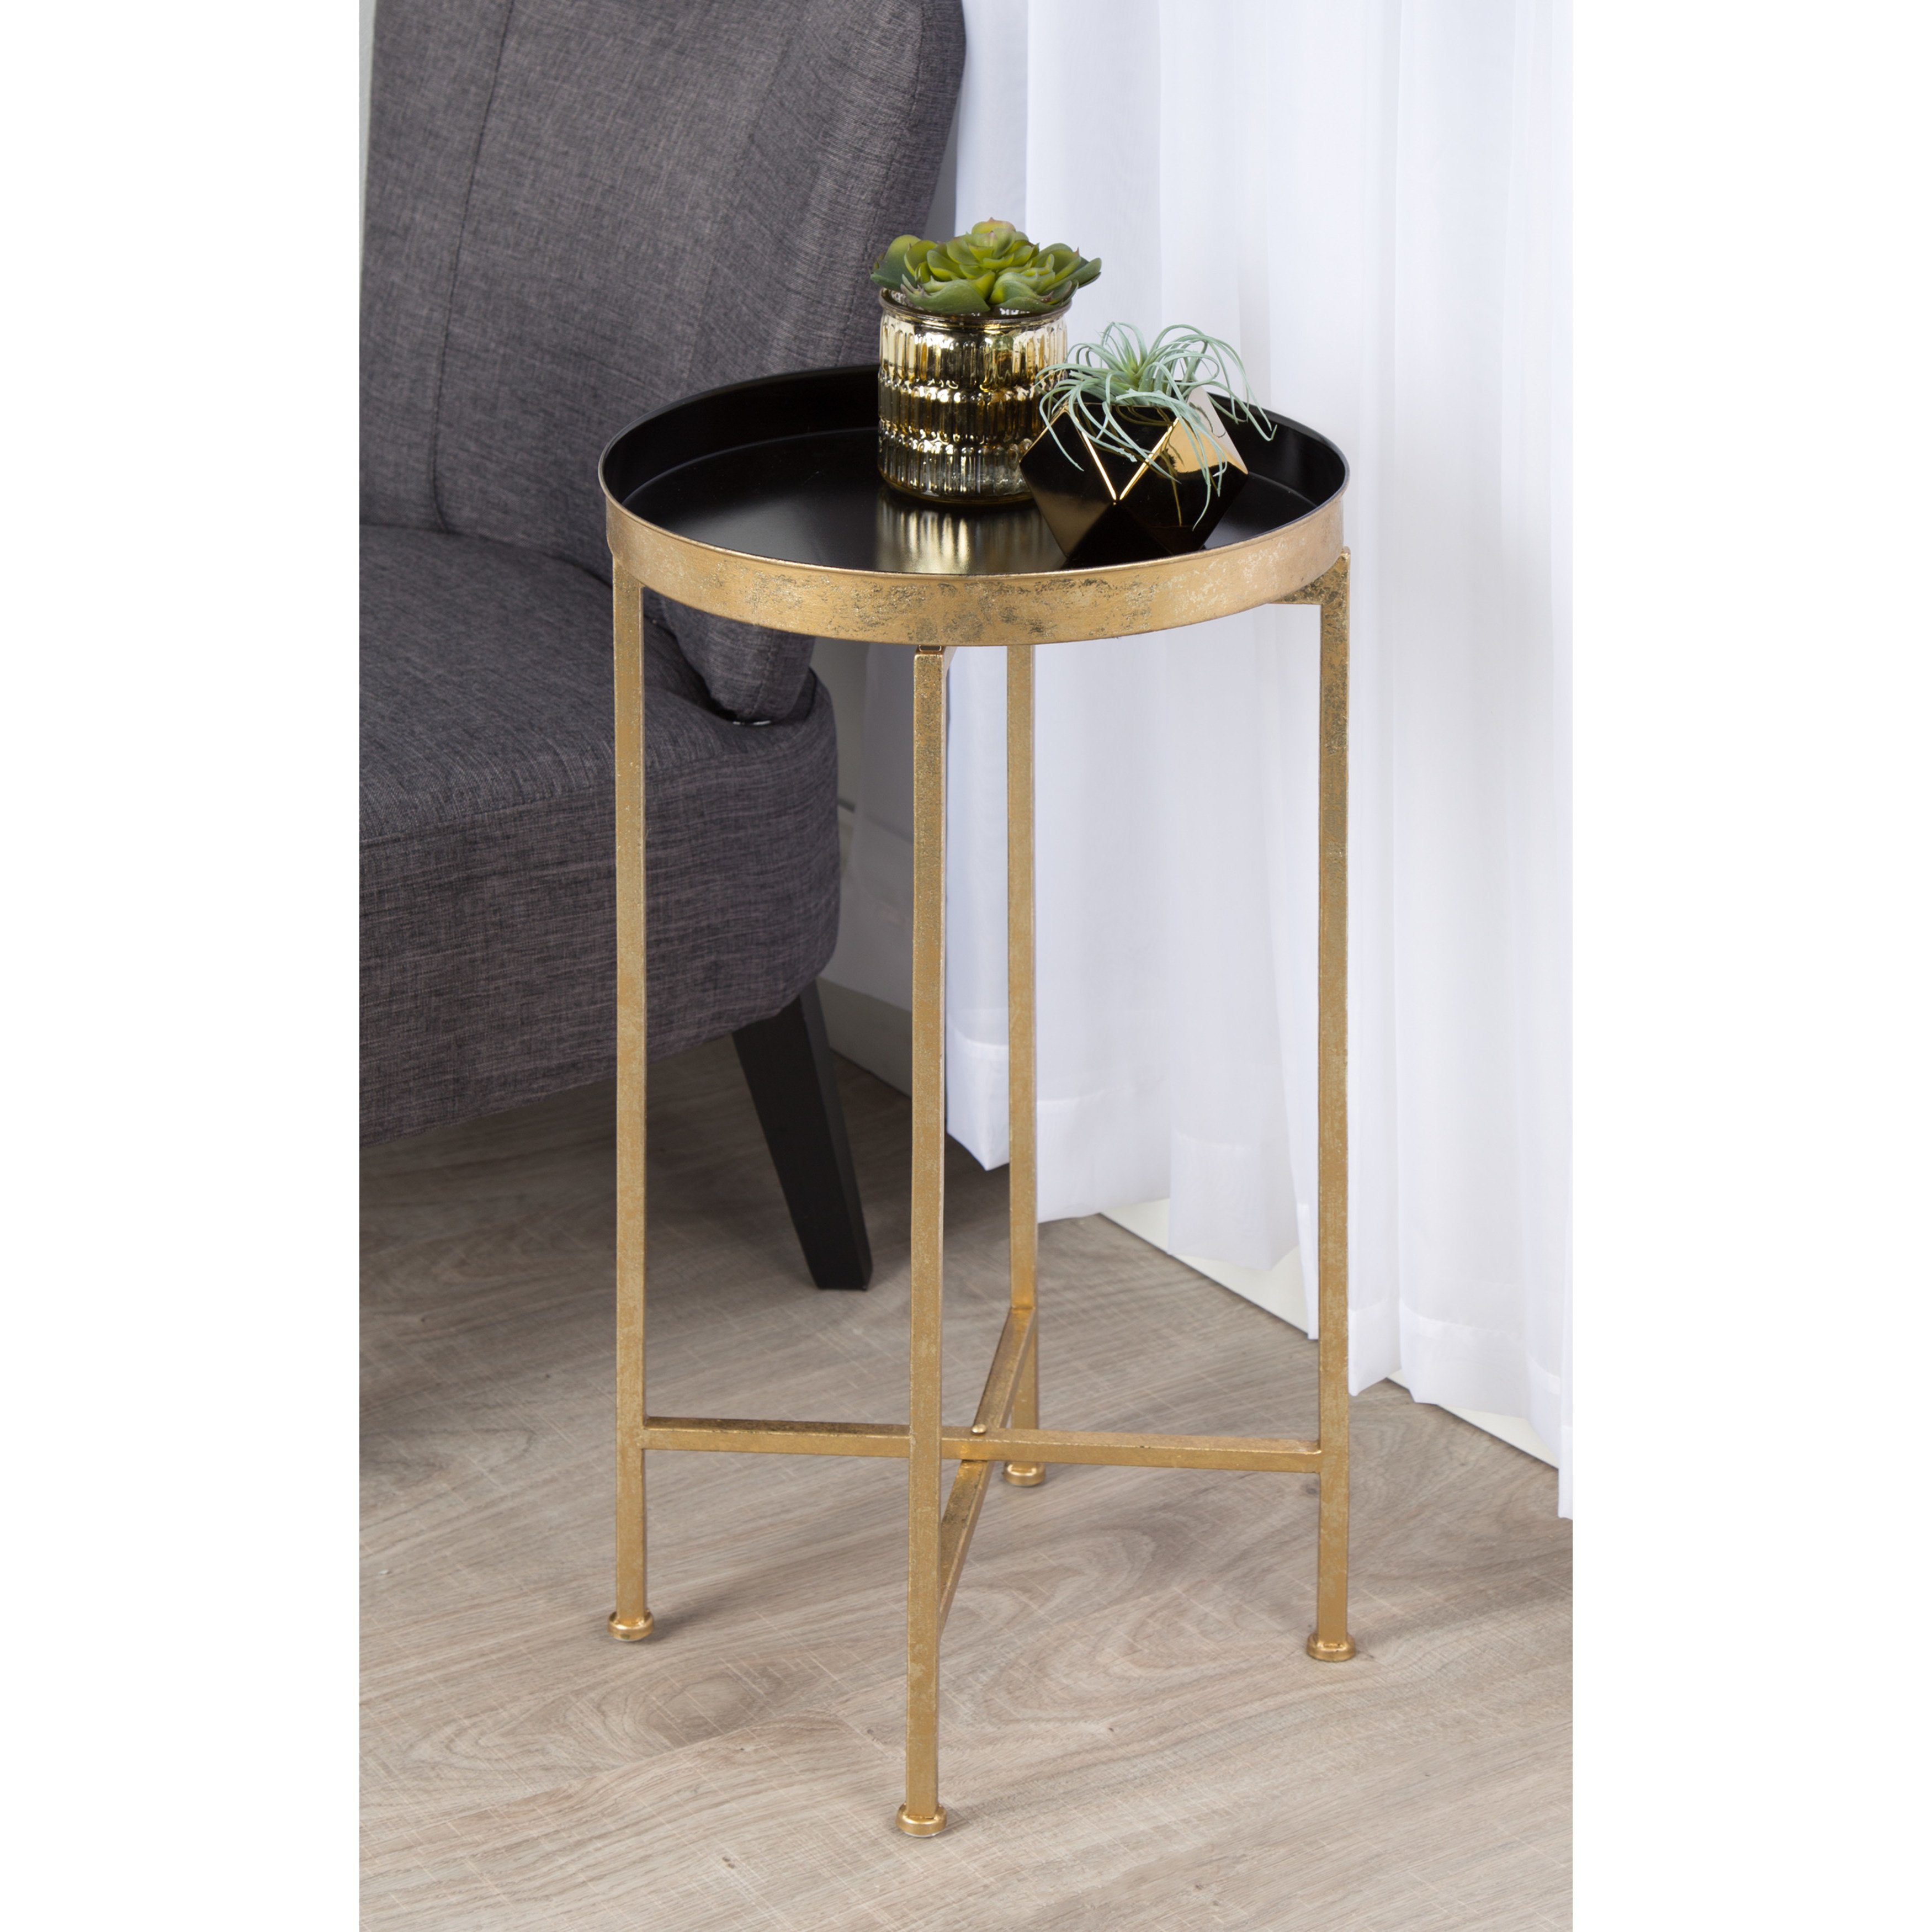 silver orchid legeay round metal foldable tray accent table porch den alamo heights zambrano and wood free shipping today little coffee rope modern white lamp legs for outdoor